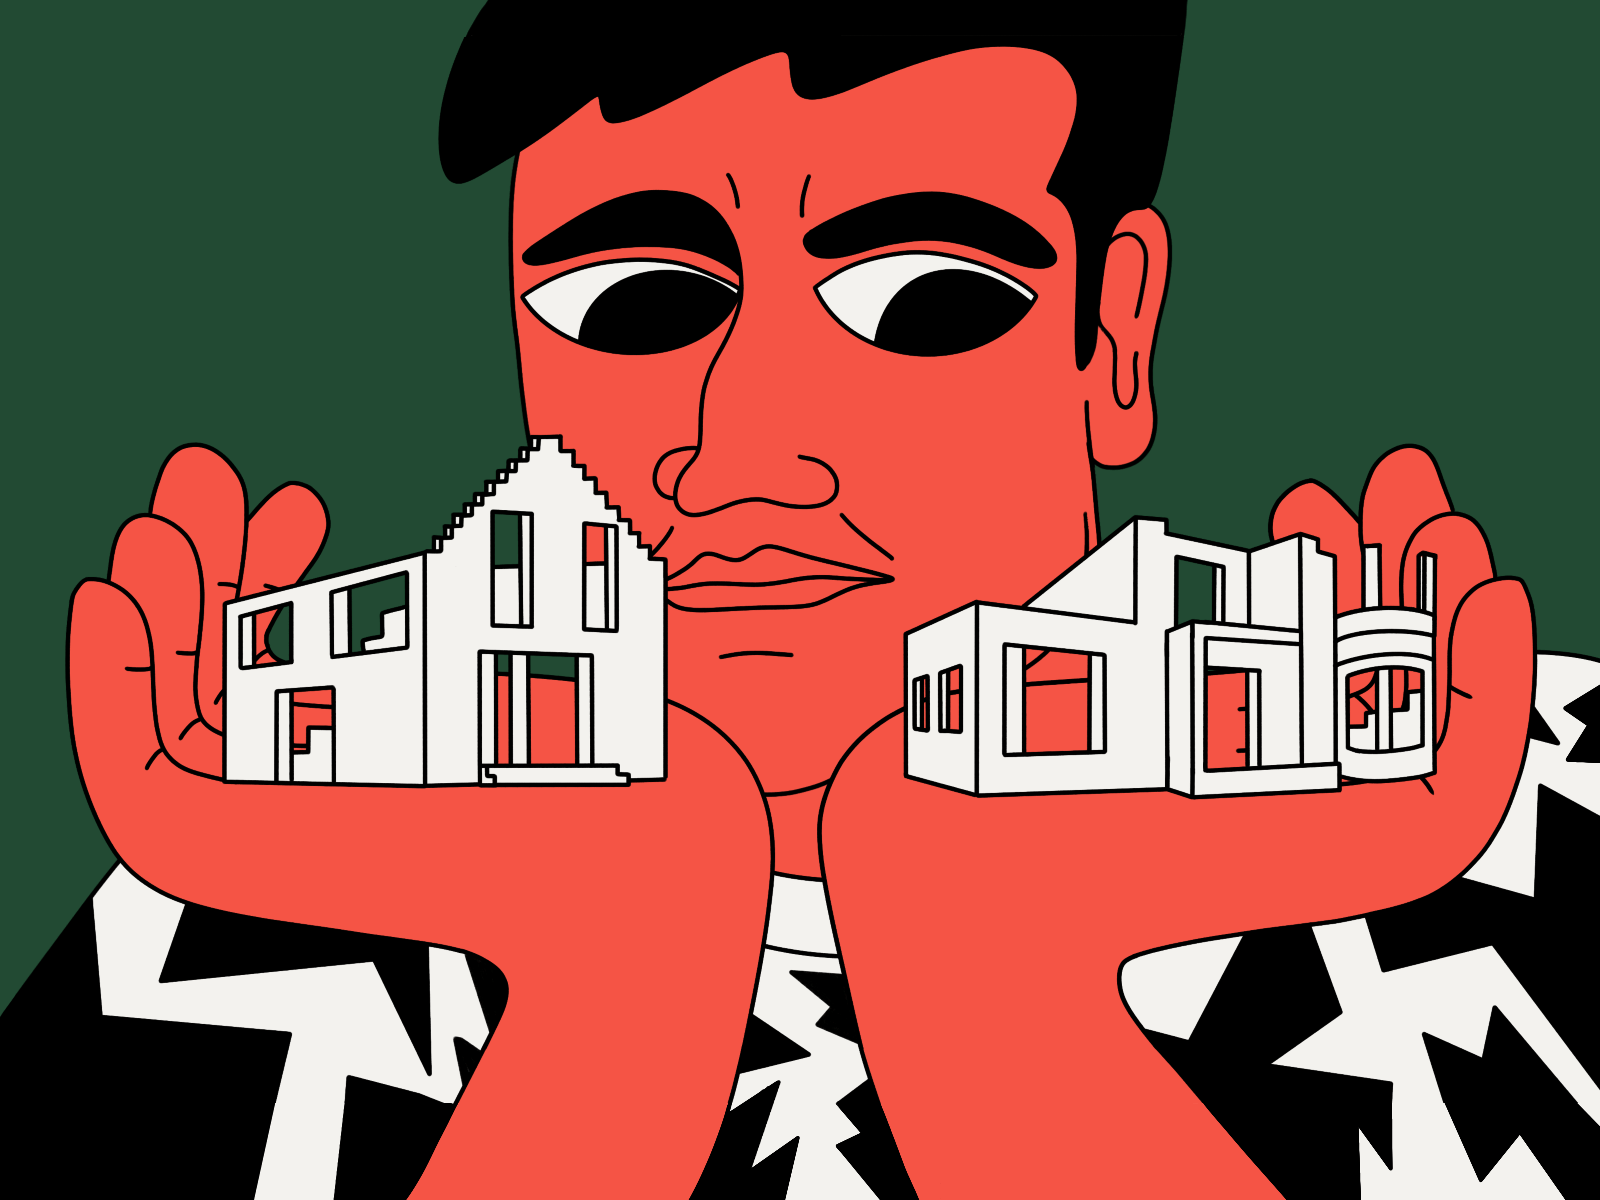 My sons are like unfinished houses color editorial illustration father gif guy illustration metaphor pattern people иллюстратор